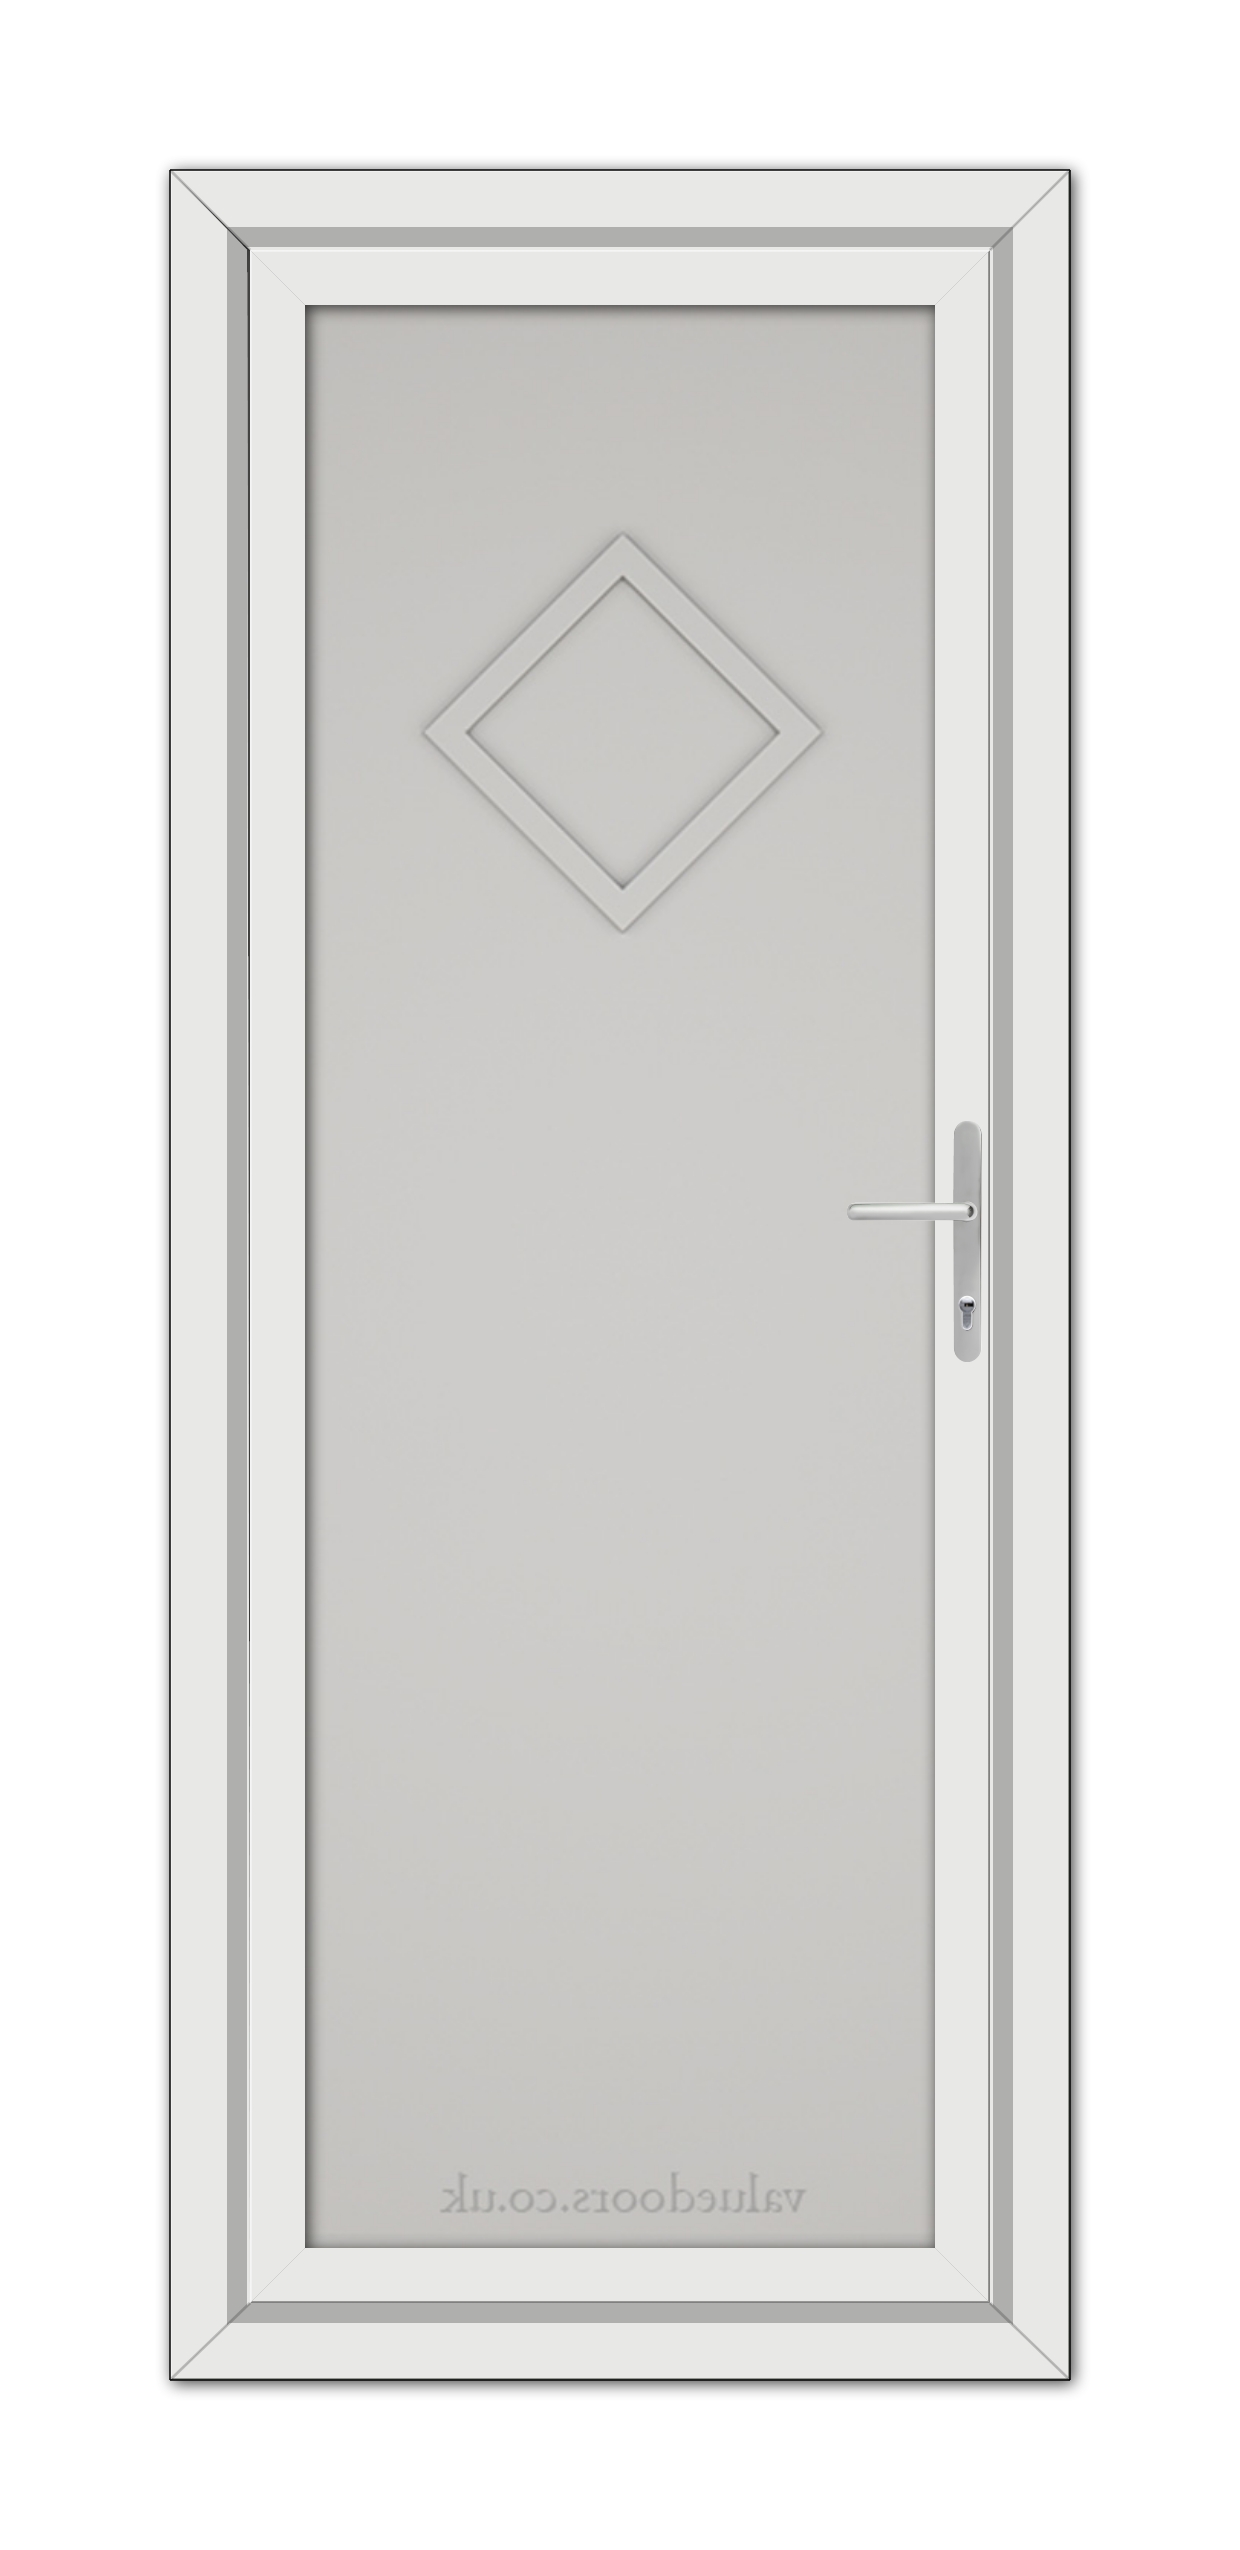 A Silver Grey Modern 5131 Solid uPVC door with a diamond-shaped window and a silver handle, viewed from the front.